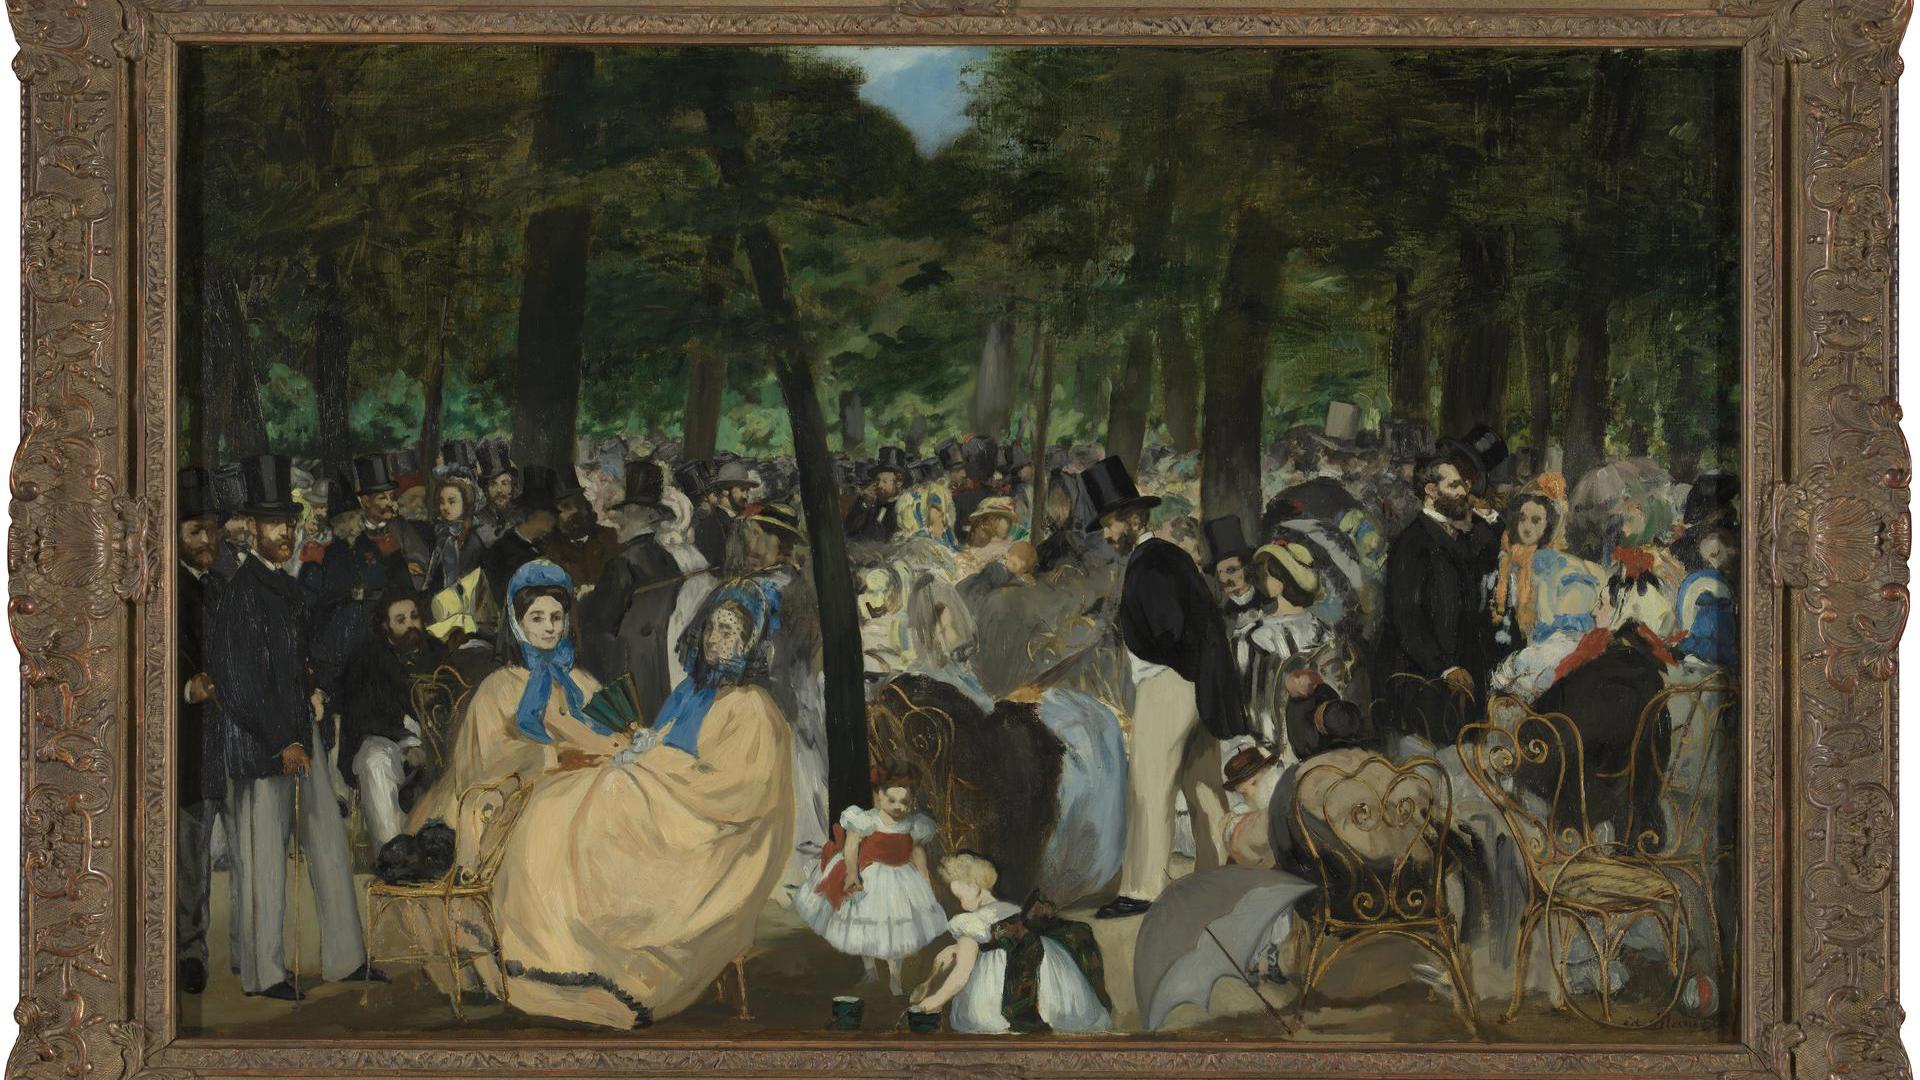 Music in the Tuileries Gardens by Edouard Manet